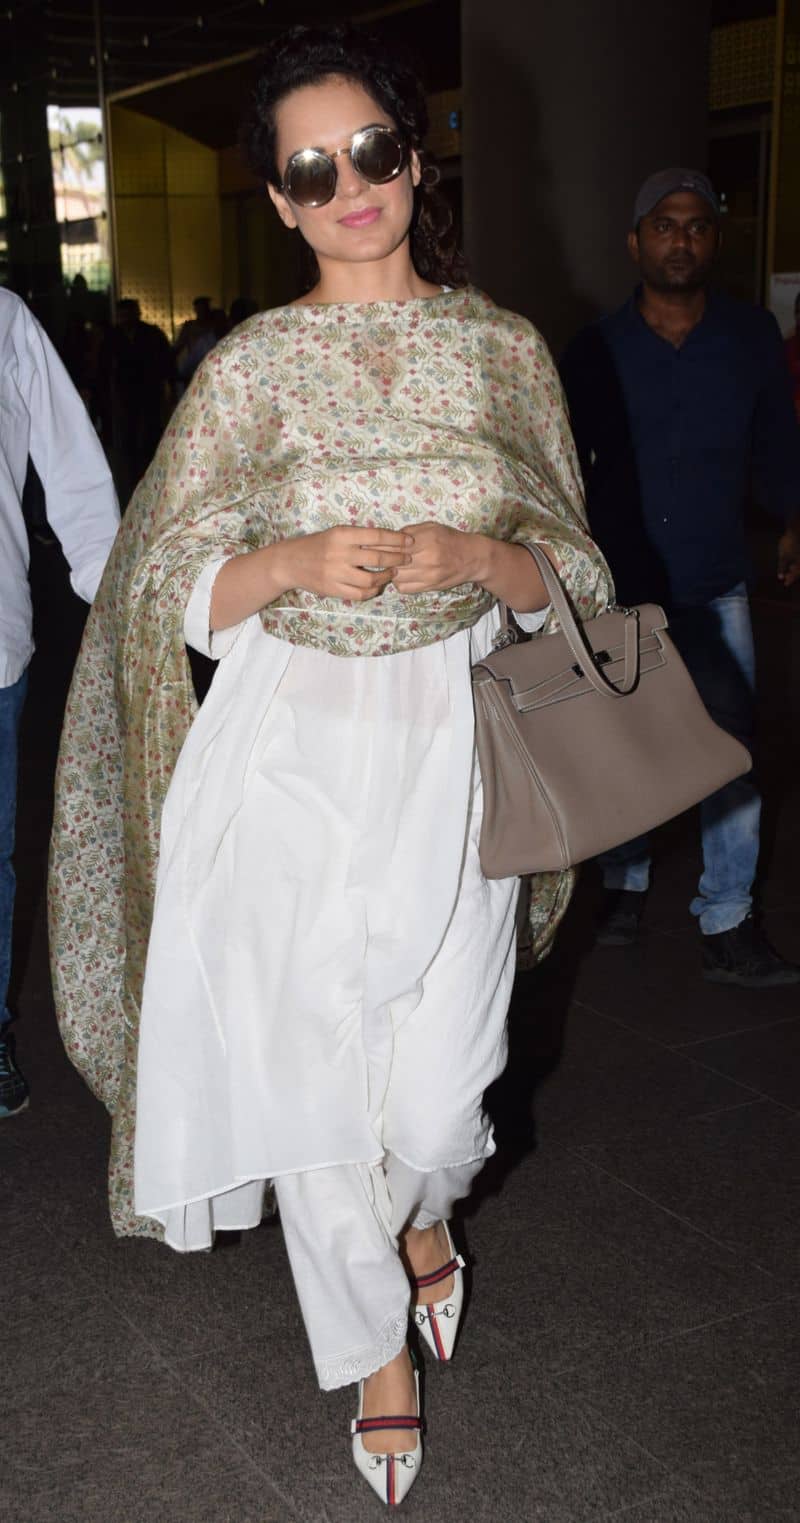 Always chic, Kangana Ranaut keeps it simple and stylish with her salwar-kameez airport outfit.